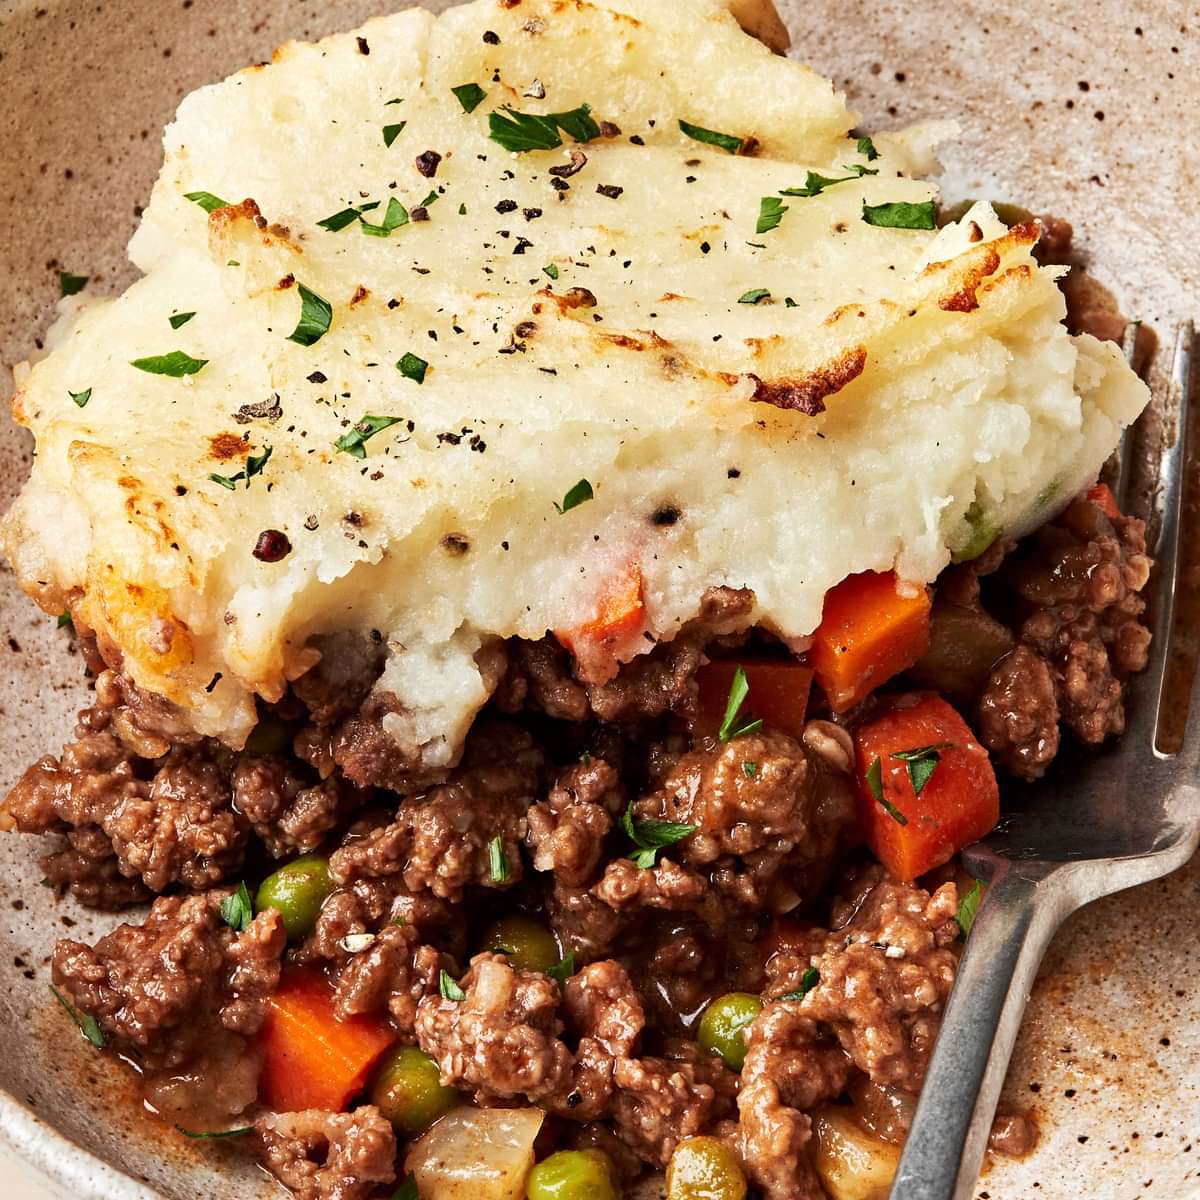 a slice of homemade shepherd's pie in a bowl with a fork